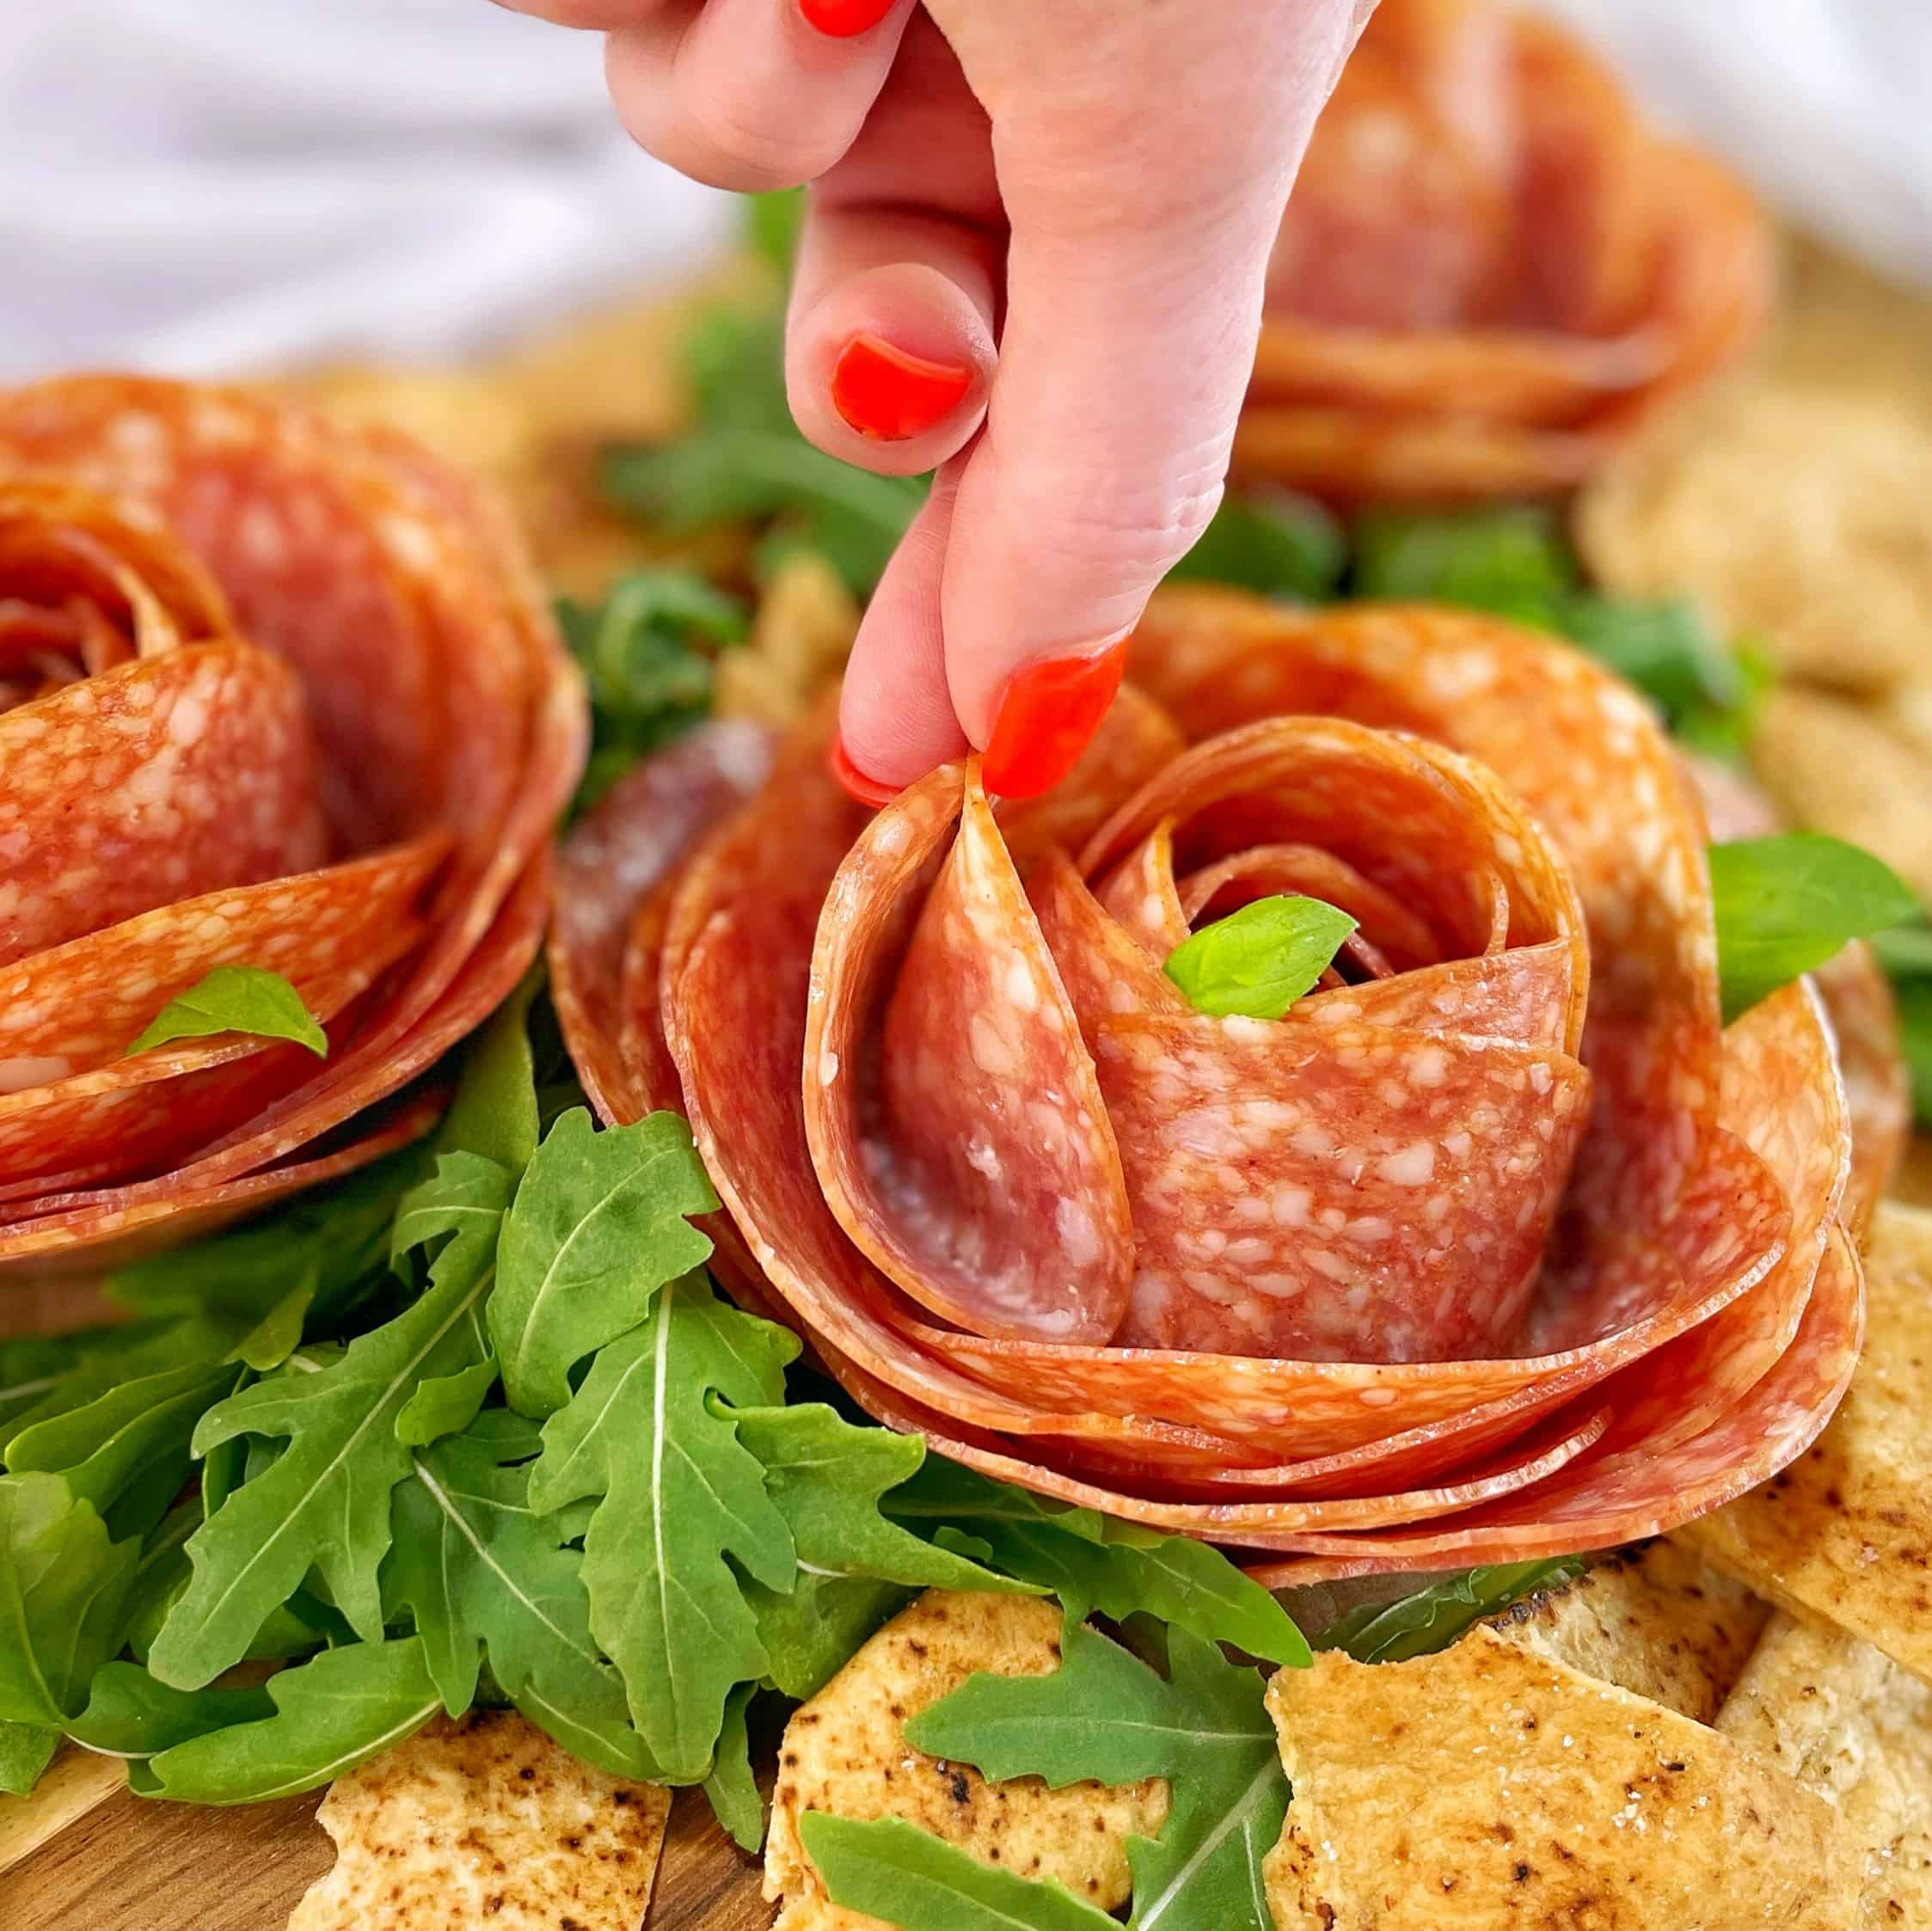 Fingers grasping a piece of pepperoni in a pepperoni rose on a wooden board with pita chips and arugula.